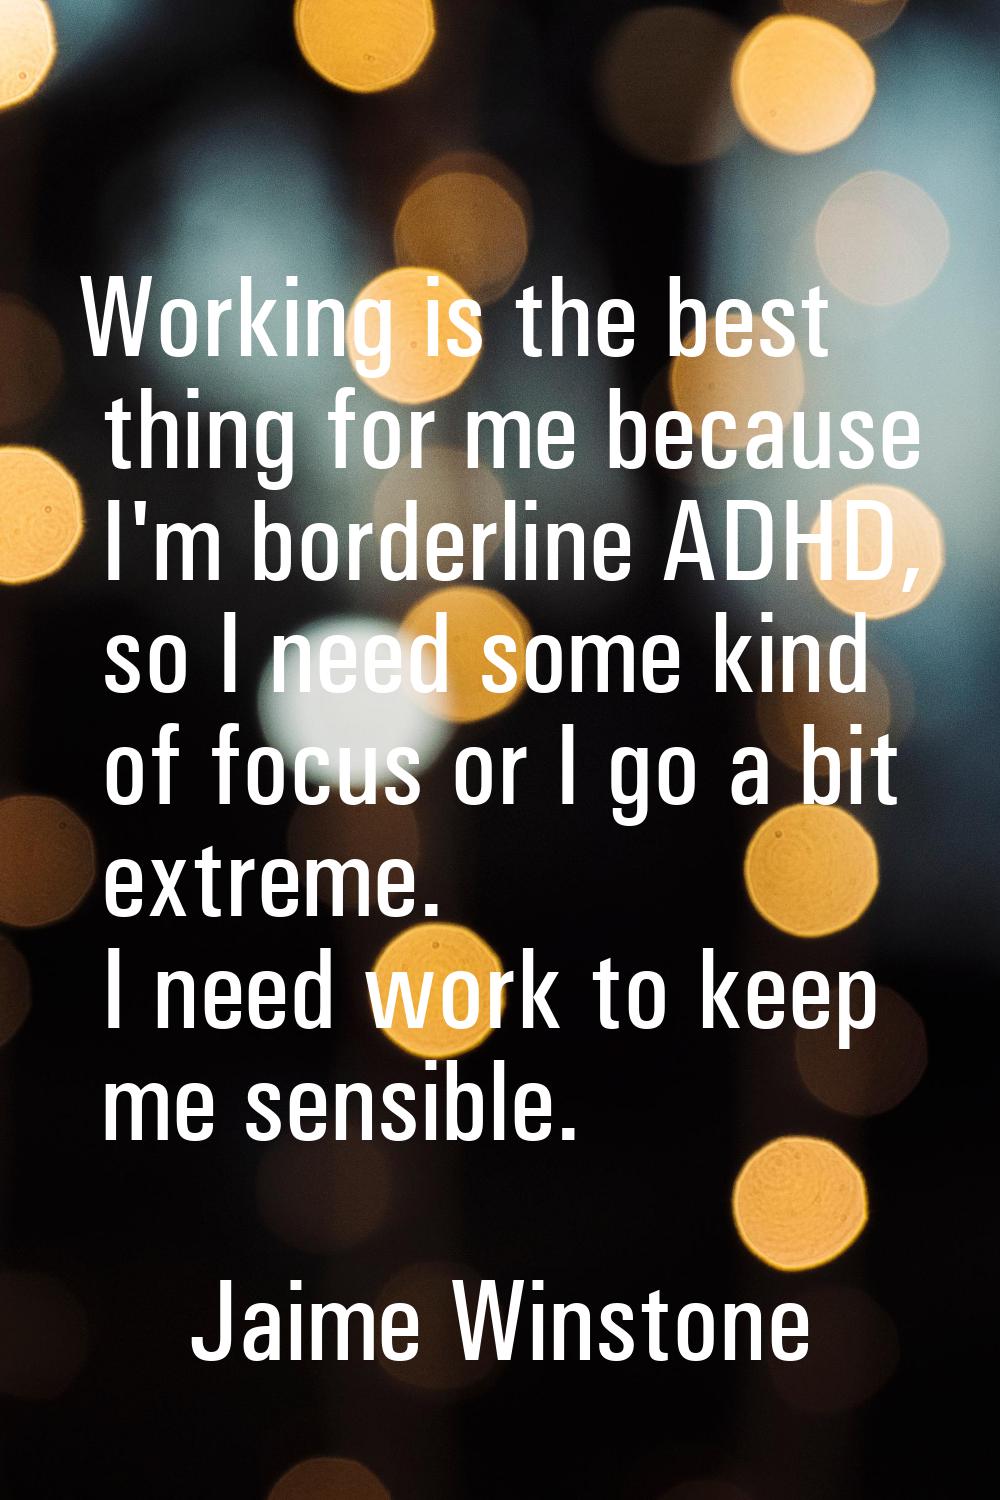 Working is the best thing for me because I'm borderline ADHD, so I need some kind of focus or I go 